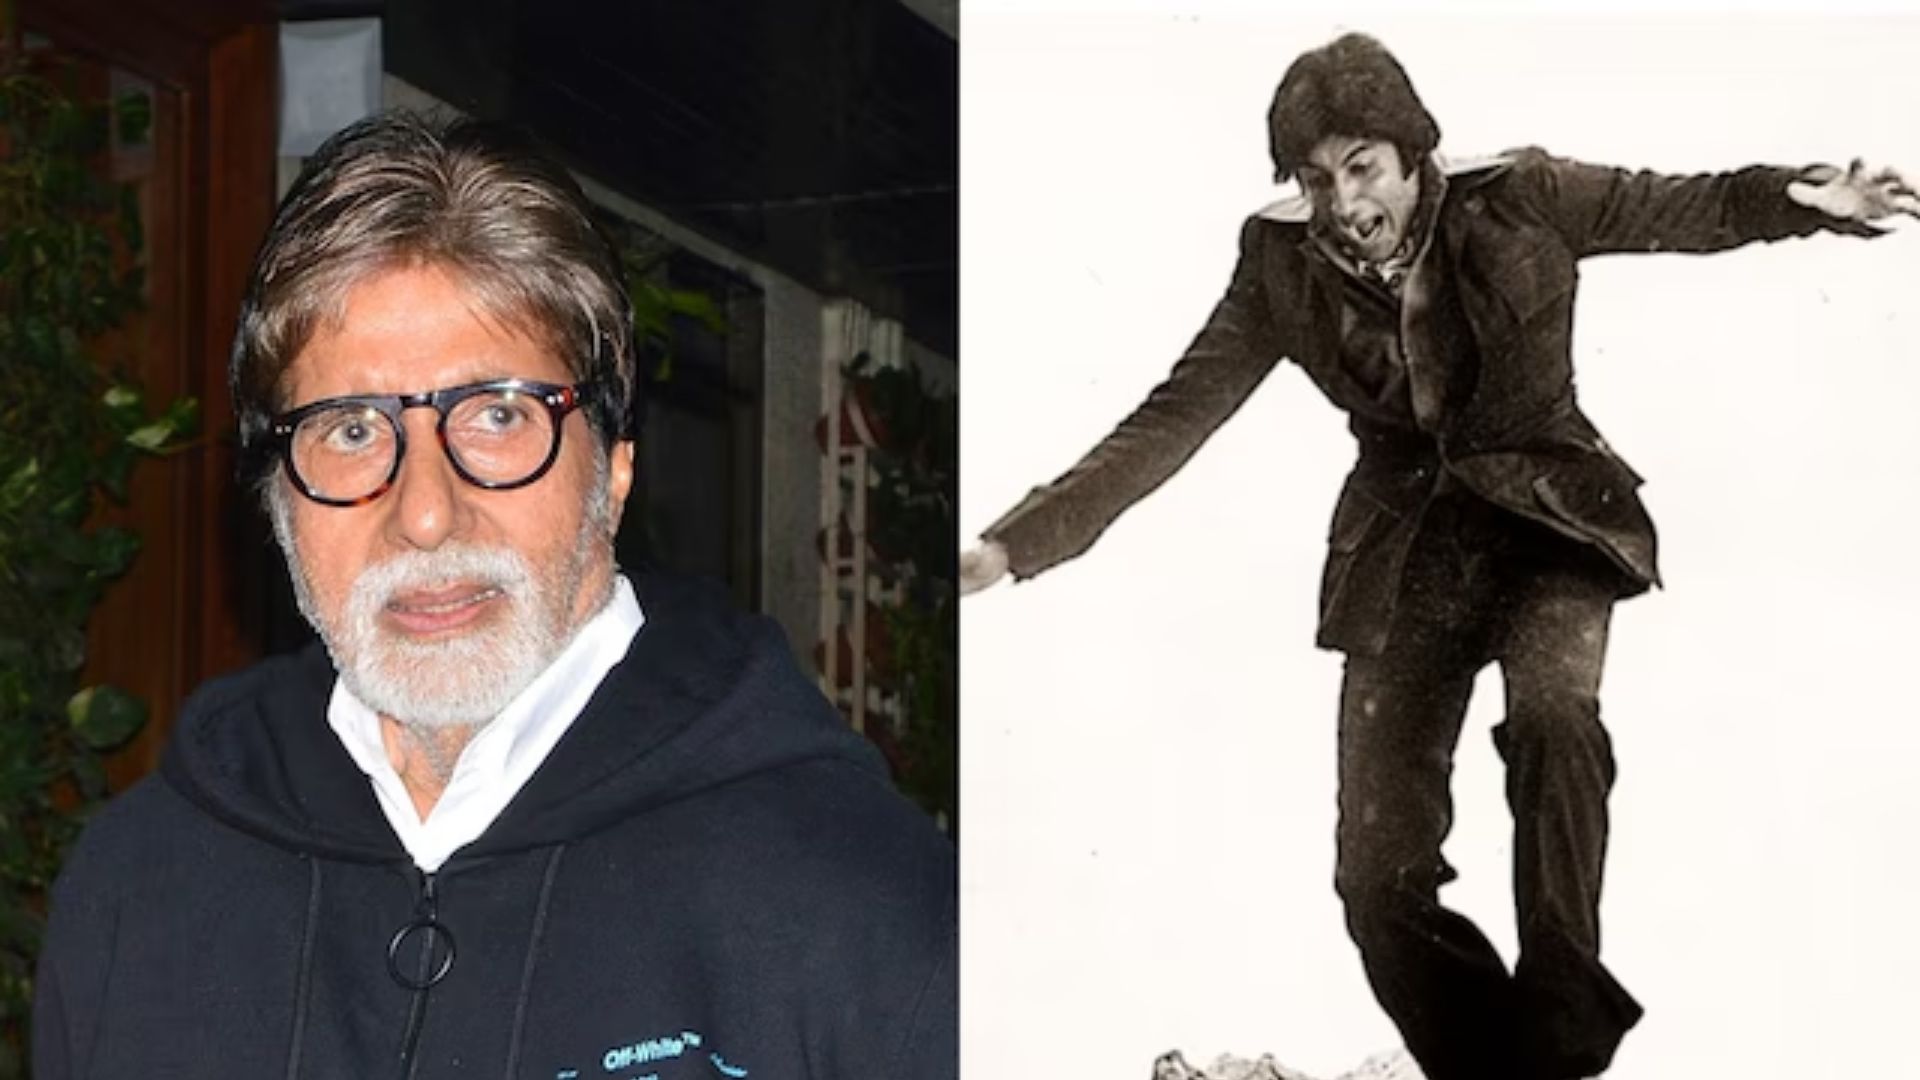 Amitabh Bachchan Reminisces About Risky Action Scenes: “No Harness, No VFX”